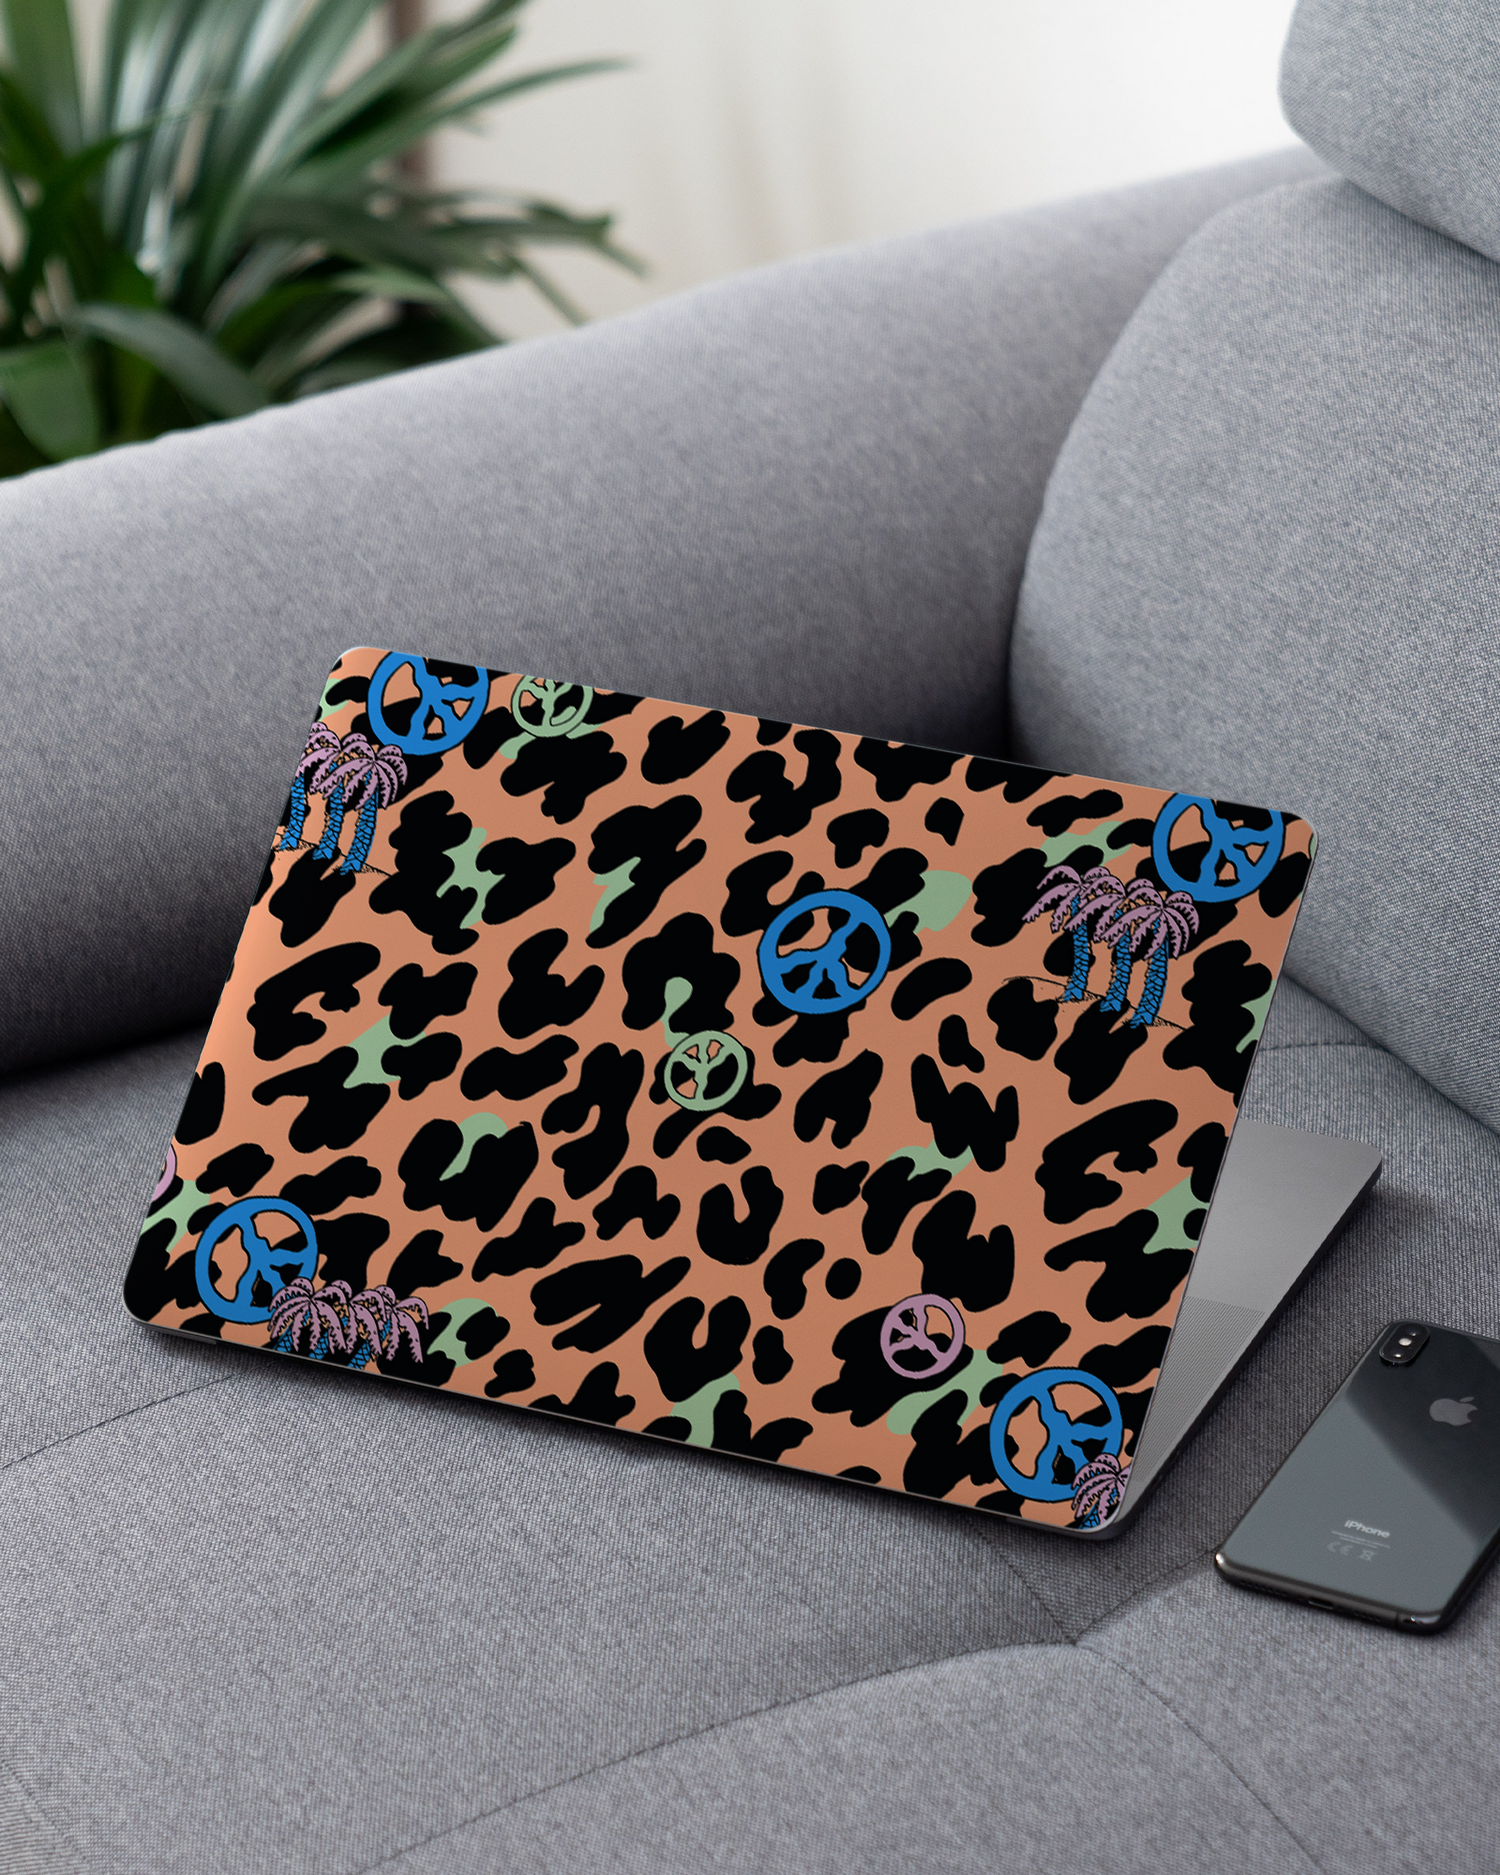 Leopard Peace Palms Laptop Skin for 13 inch Apple MacBooks on a couch